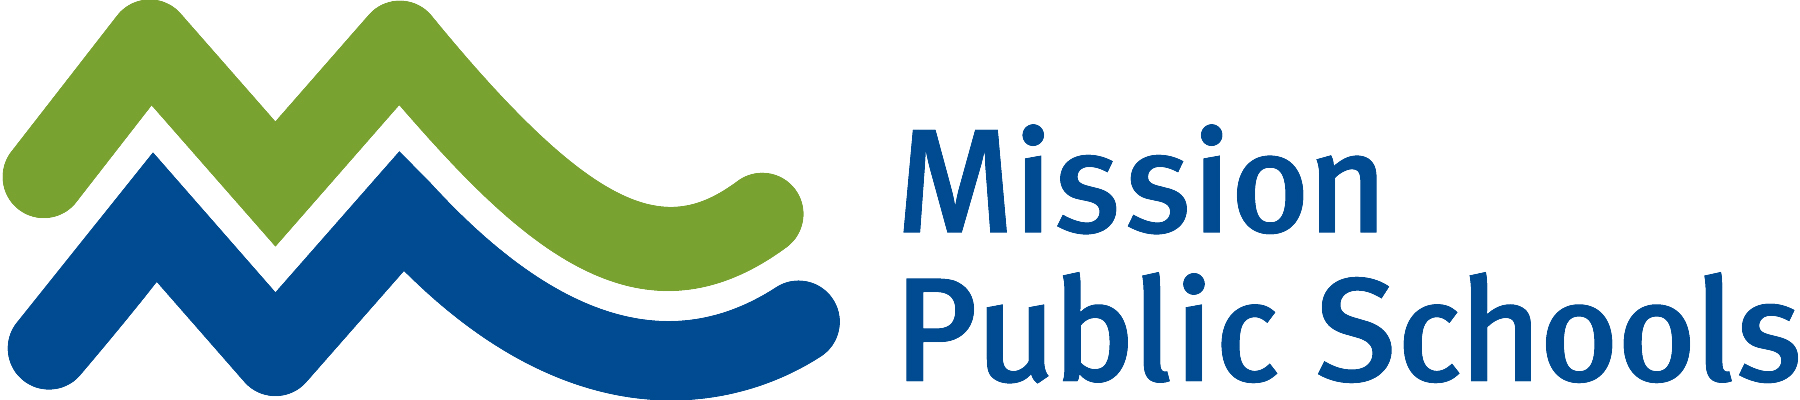 Mission Public Schools<br><span class="province">BC州</span><span class="type">公立</span>